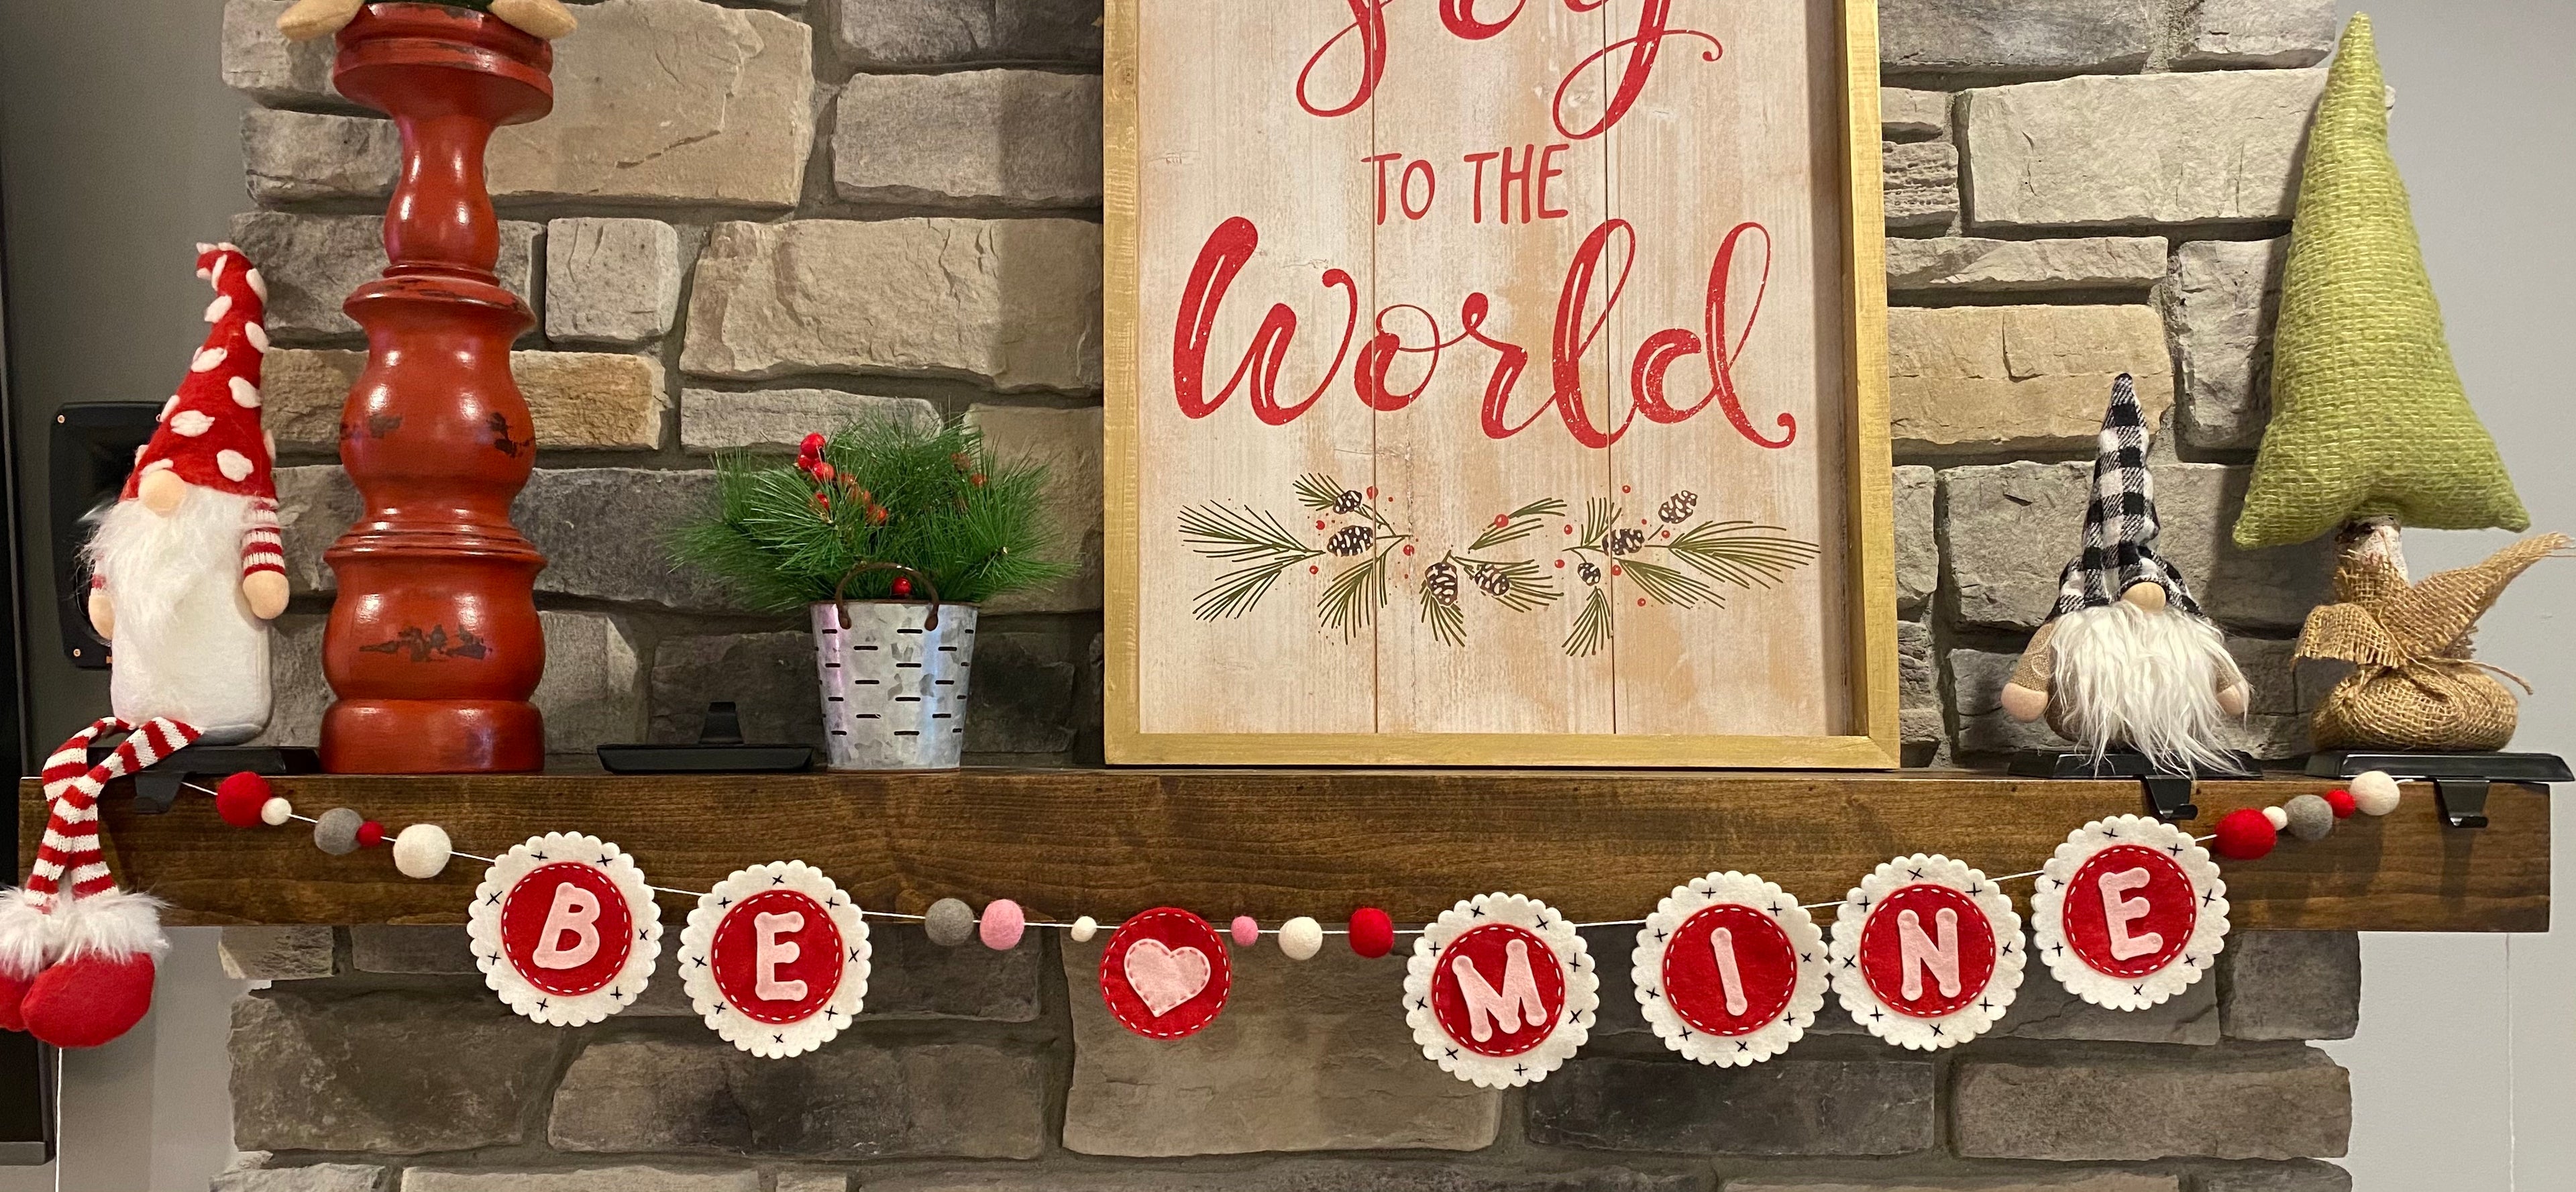 Felt hand sewn letters and garland. valentines decor. red, white and pink 